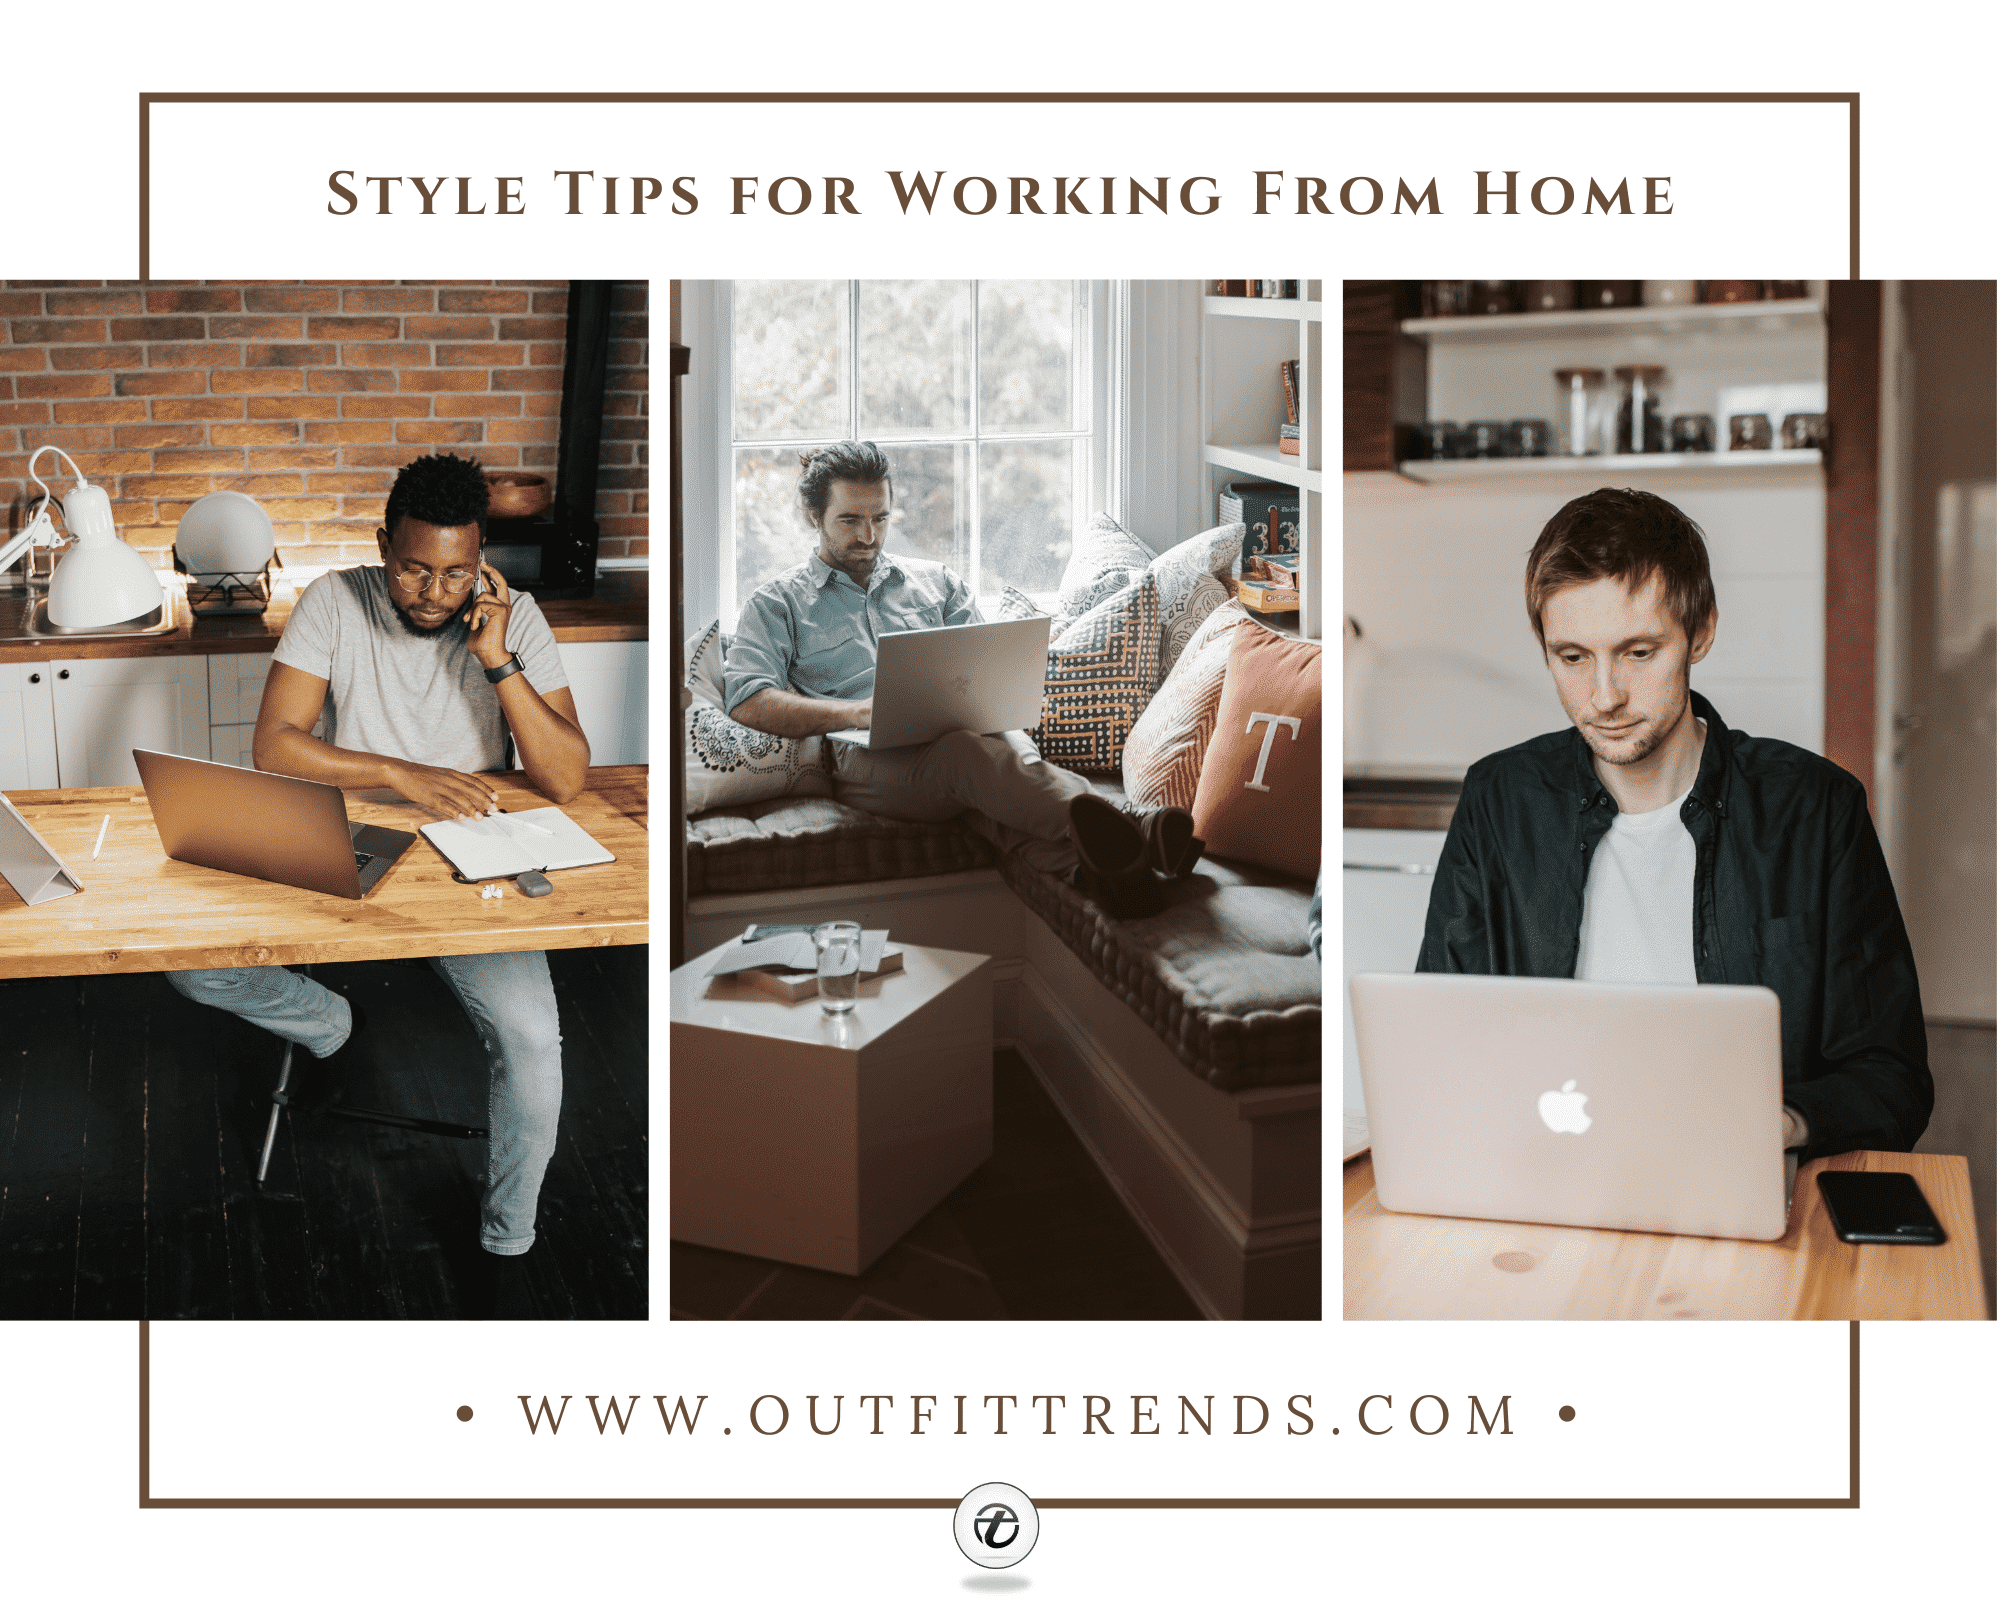 Men's WFH Style Guide| 35 Best Casual Work From Home Outfits